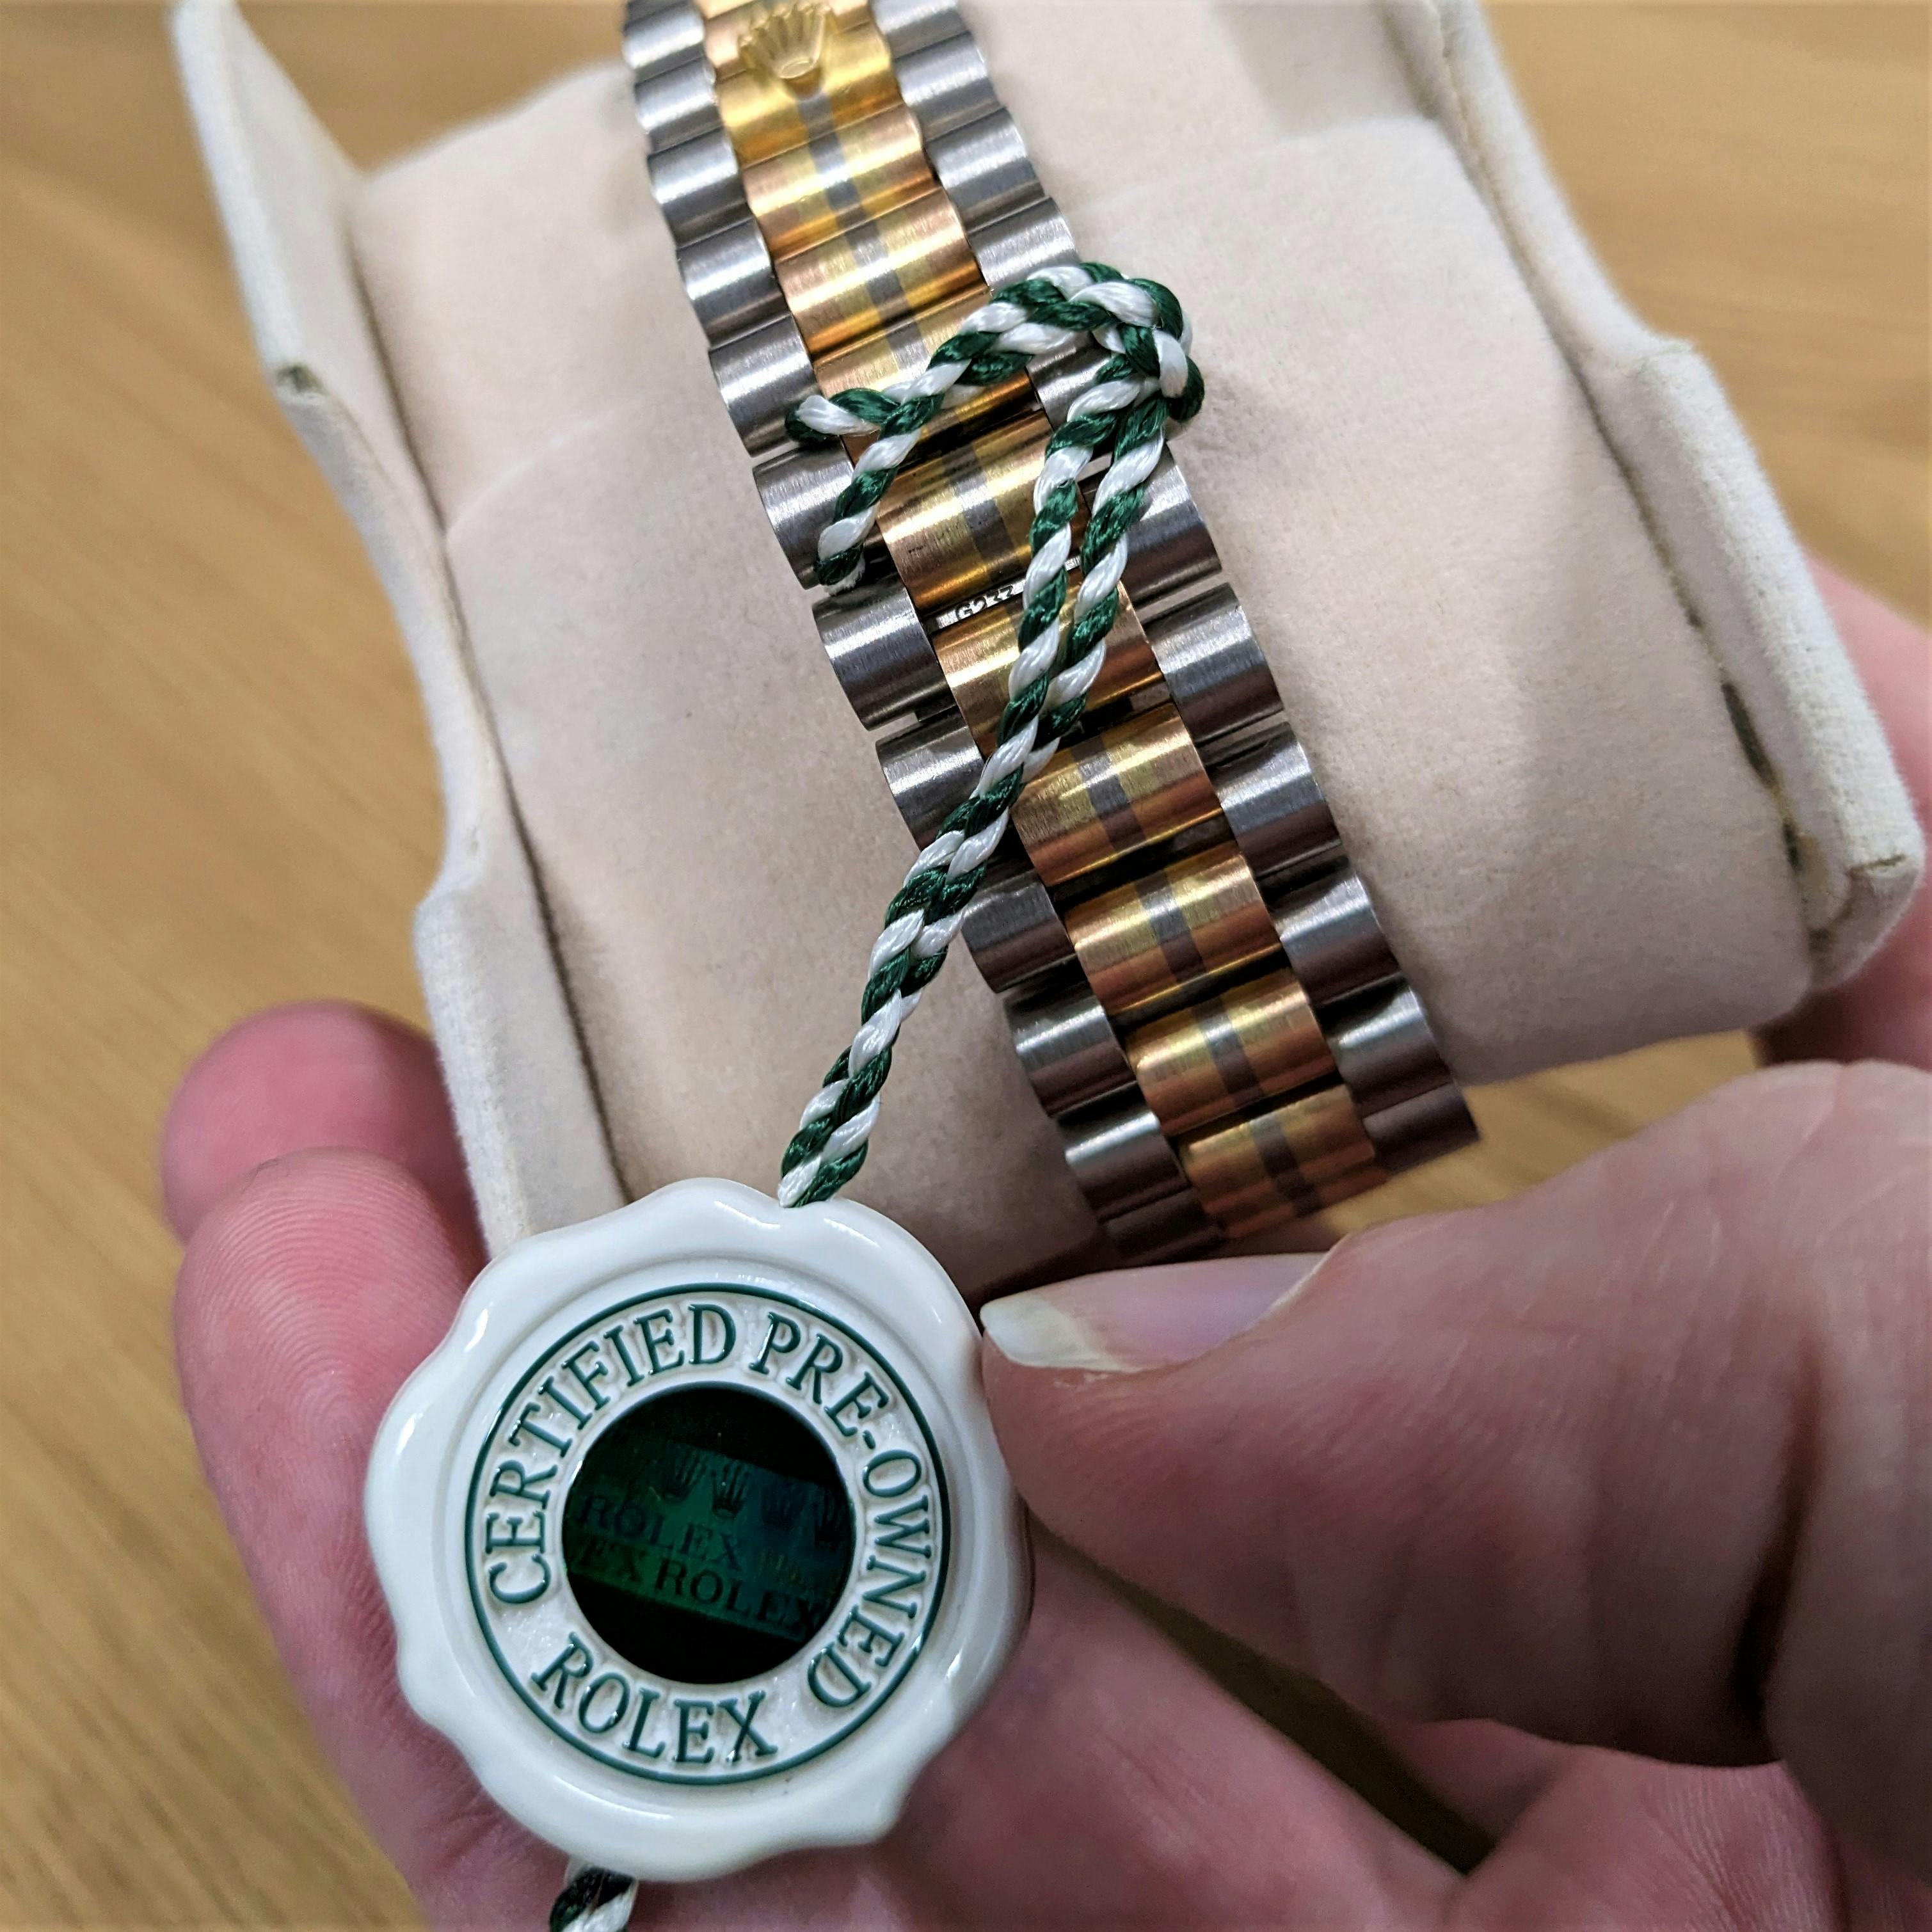 A Pre-owned Rolex showing the new tag that Rolex apply to all watches that have gone through their Certified Pre-Owned Scheme. They also come with a new guarantee certificate. 